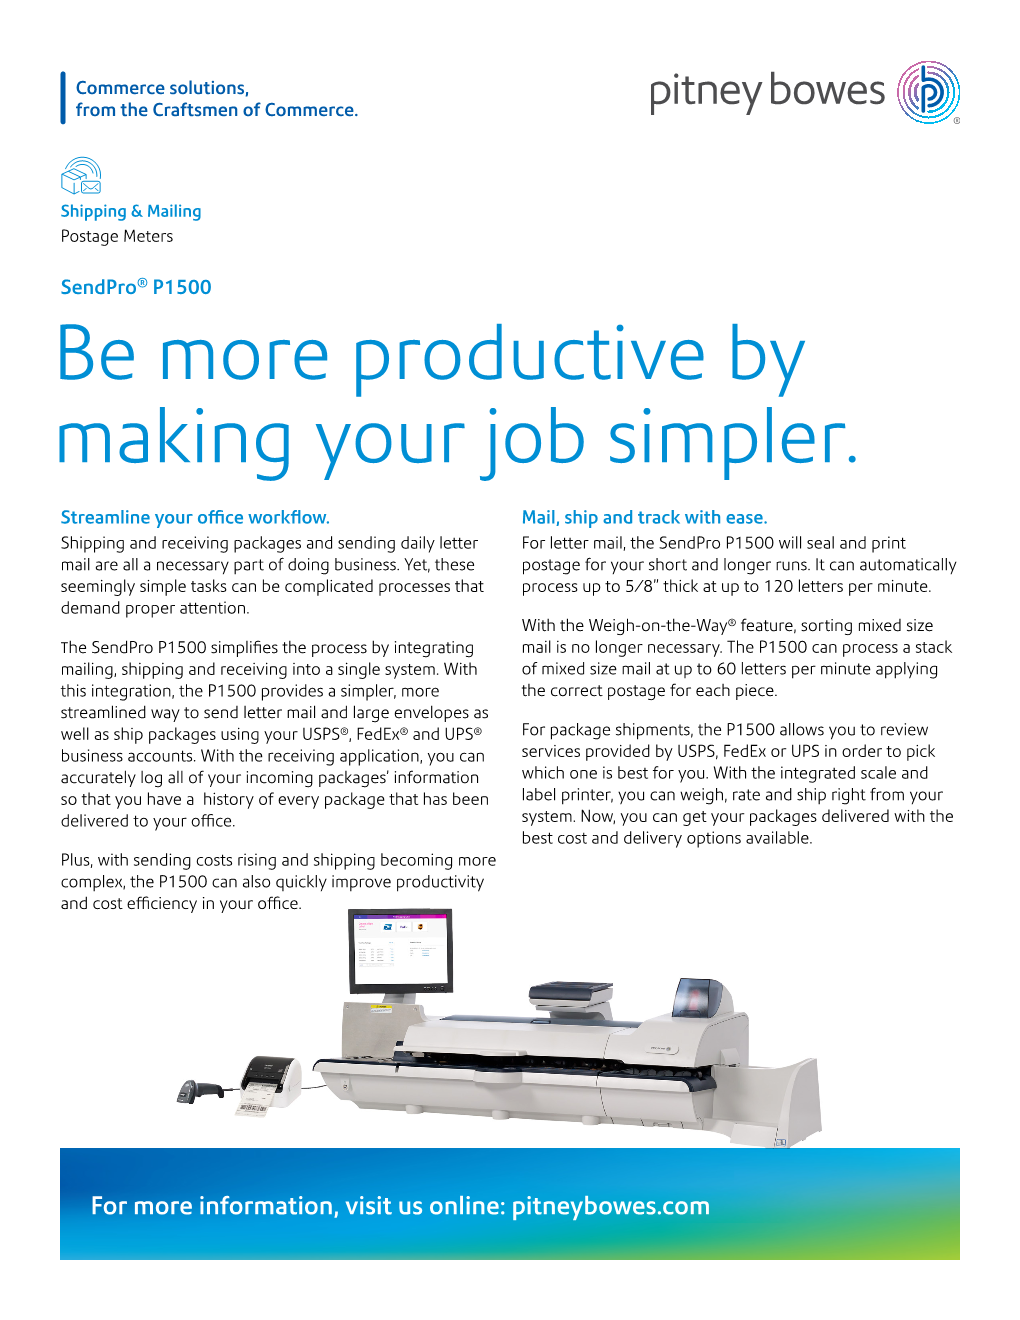 Be More Productive by Making Your Job Simpler